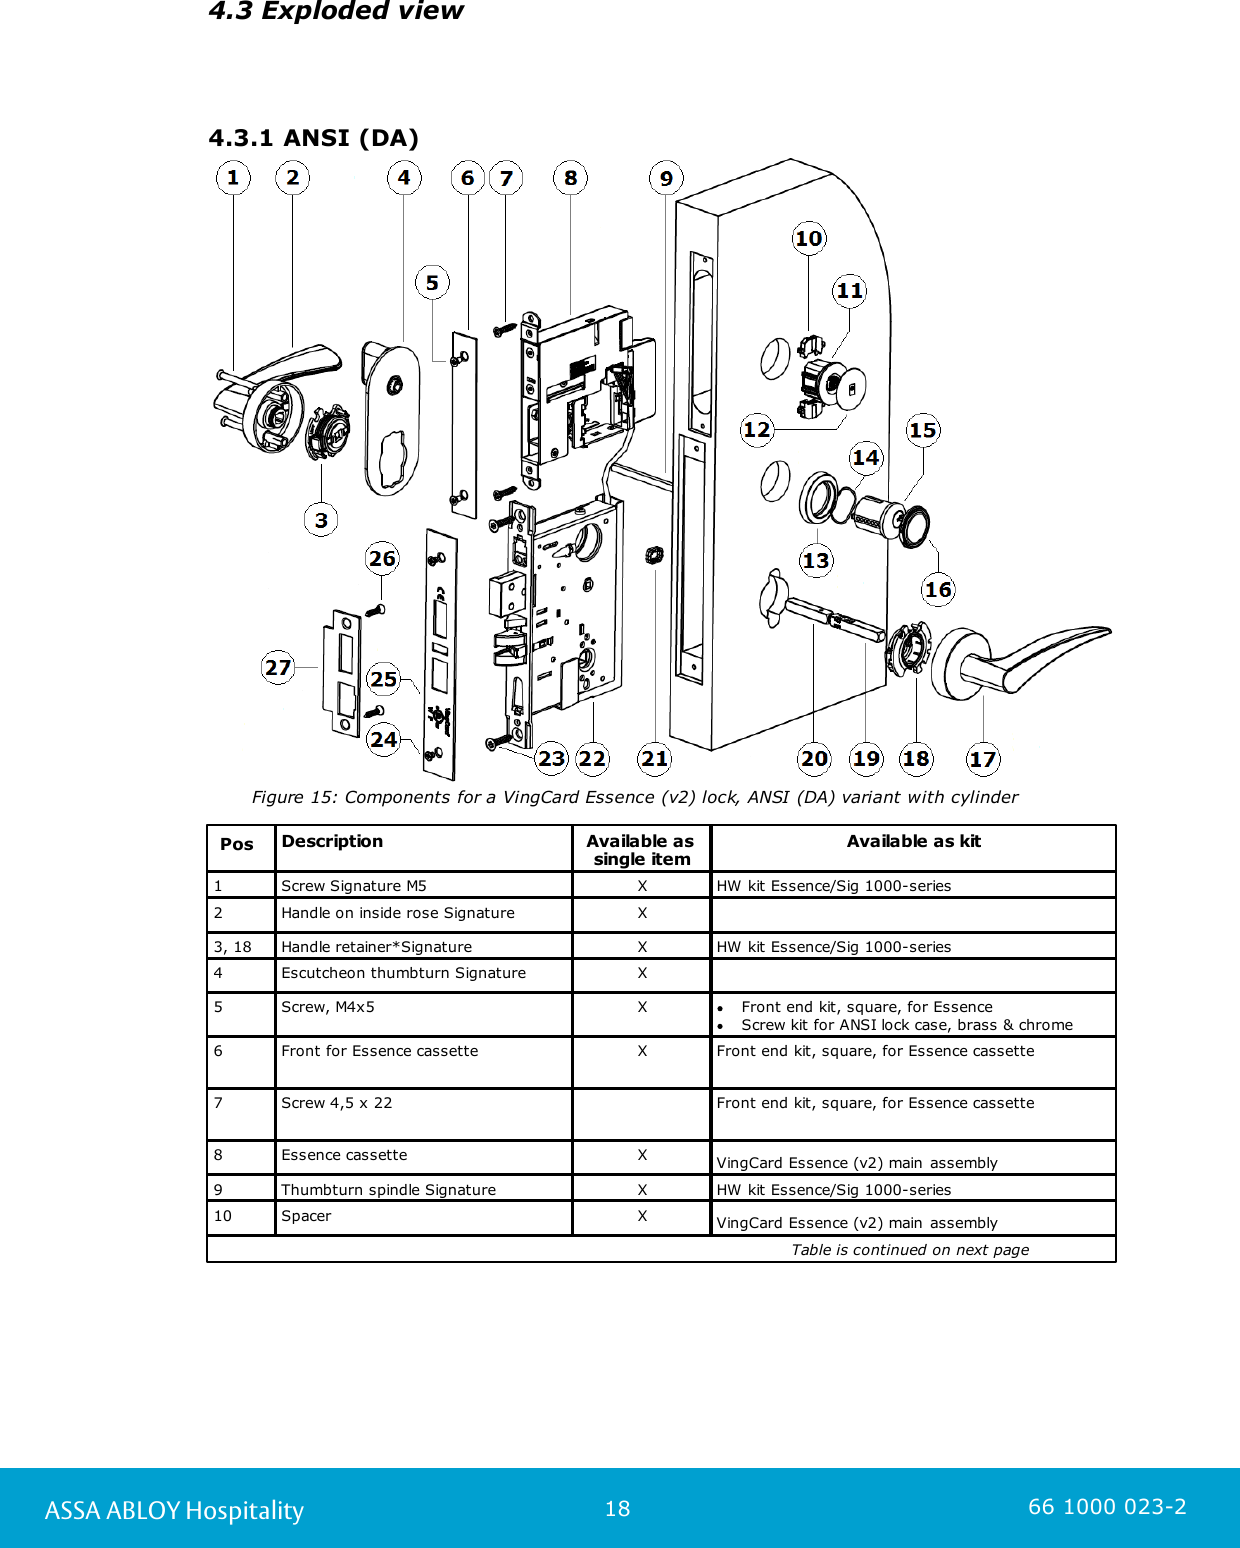 18ASSA ABLOY Hospitality 66 1000 023-24.3 Exploded view4.3.1 ANSI (DA)      Figure 15: Components for a VingCard Essence (v2) lock, ANSI (DA) variant with cylinder PosDescriptionAvailable as single itemAvailable as kit1Screw Signature M5 XHW kit Essence/Sig 1000-series2Handle on inside rose Signature X3, 18Handle retainer*Signature XHW kit Essence/Sig 1000-series4Escutcheon thumbturn SignatureX5Screw, M4x5XFront end kit, square, for Essence Screw kit for ANSI lock case, brass &amp; chrome6Front for Essence cassetteXFront end kit, square, for Essence cassette7Screw 4,5 x 22Front end kit, square, for Essence cassette8Essence cassette XVingCard Essence (v2) main assembly9Thumbturn spindle SignatureXHW kit Essence/Sig 1000-series10SpacerXVingCard Essence (v2) main assembly                                                                                                               Table is continued on next page